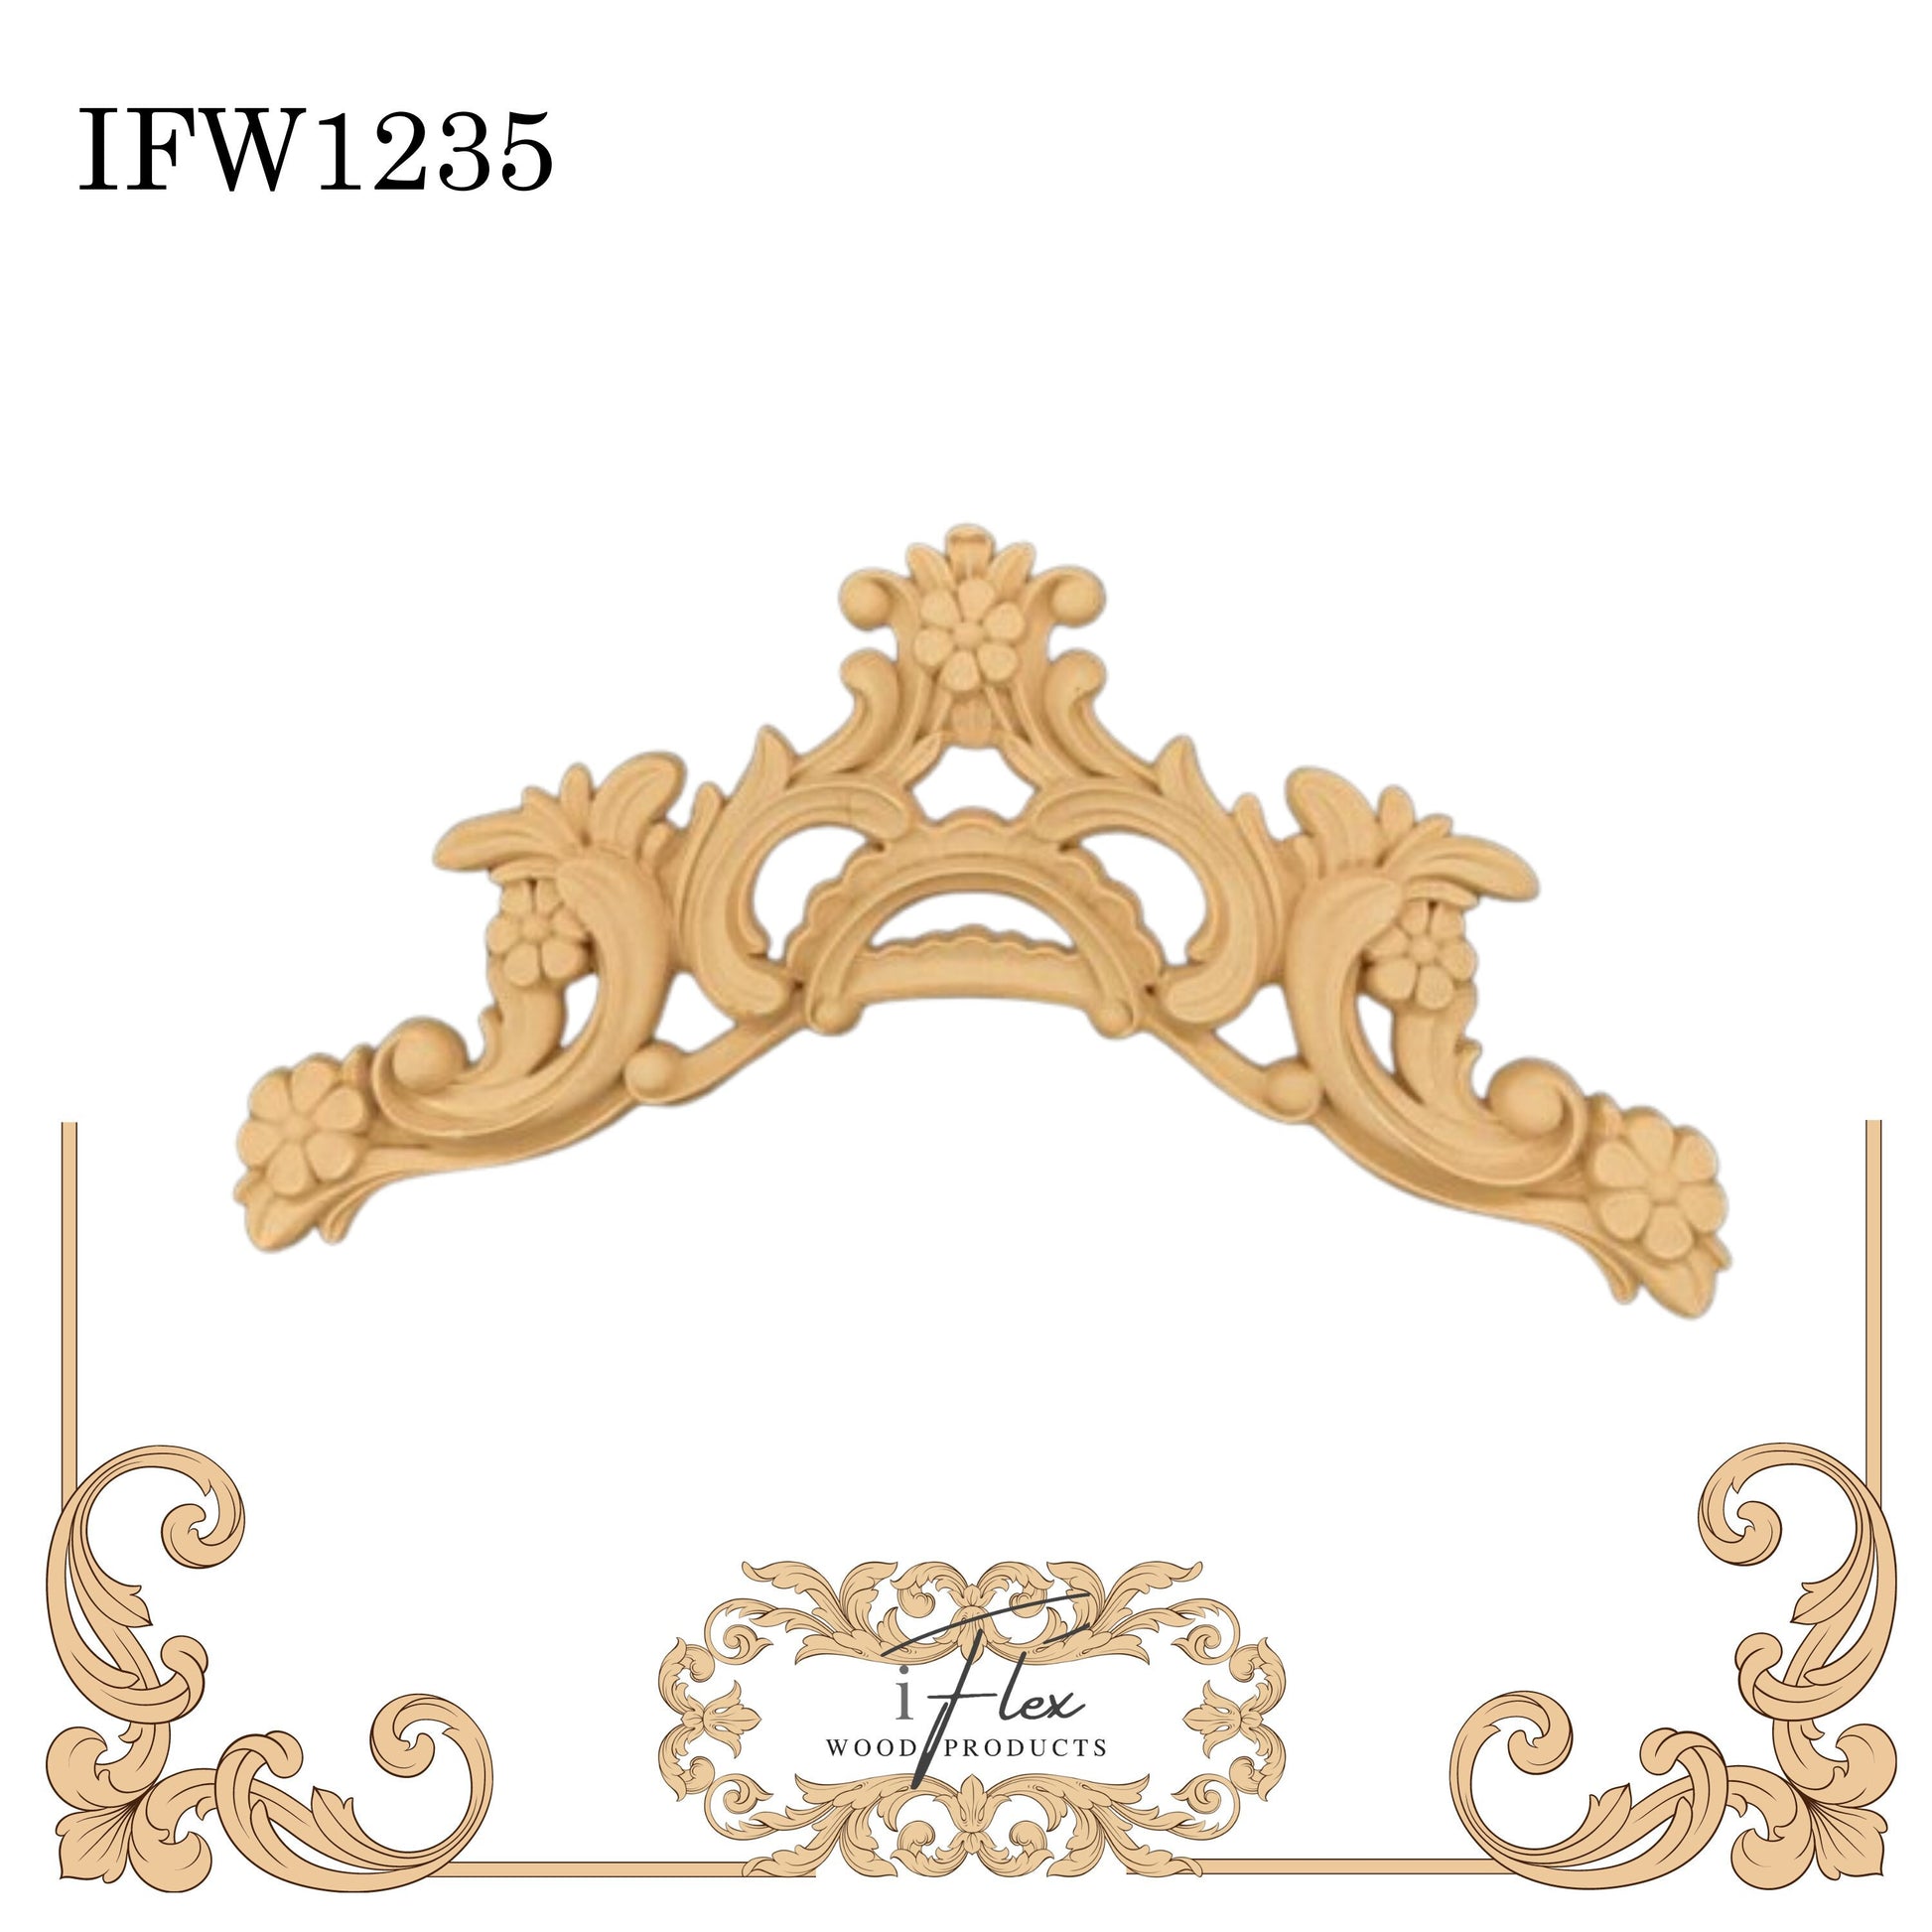 IFW 1235 iFlex Wood Products, bendable mouldings, flexible, wooden appliques, pediment